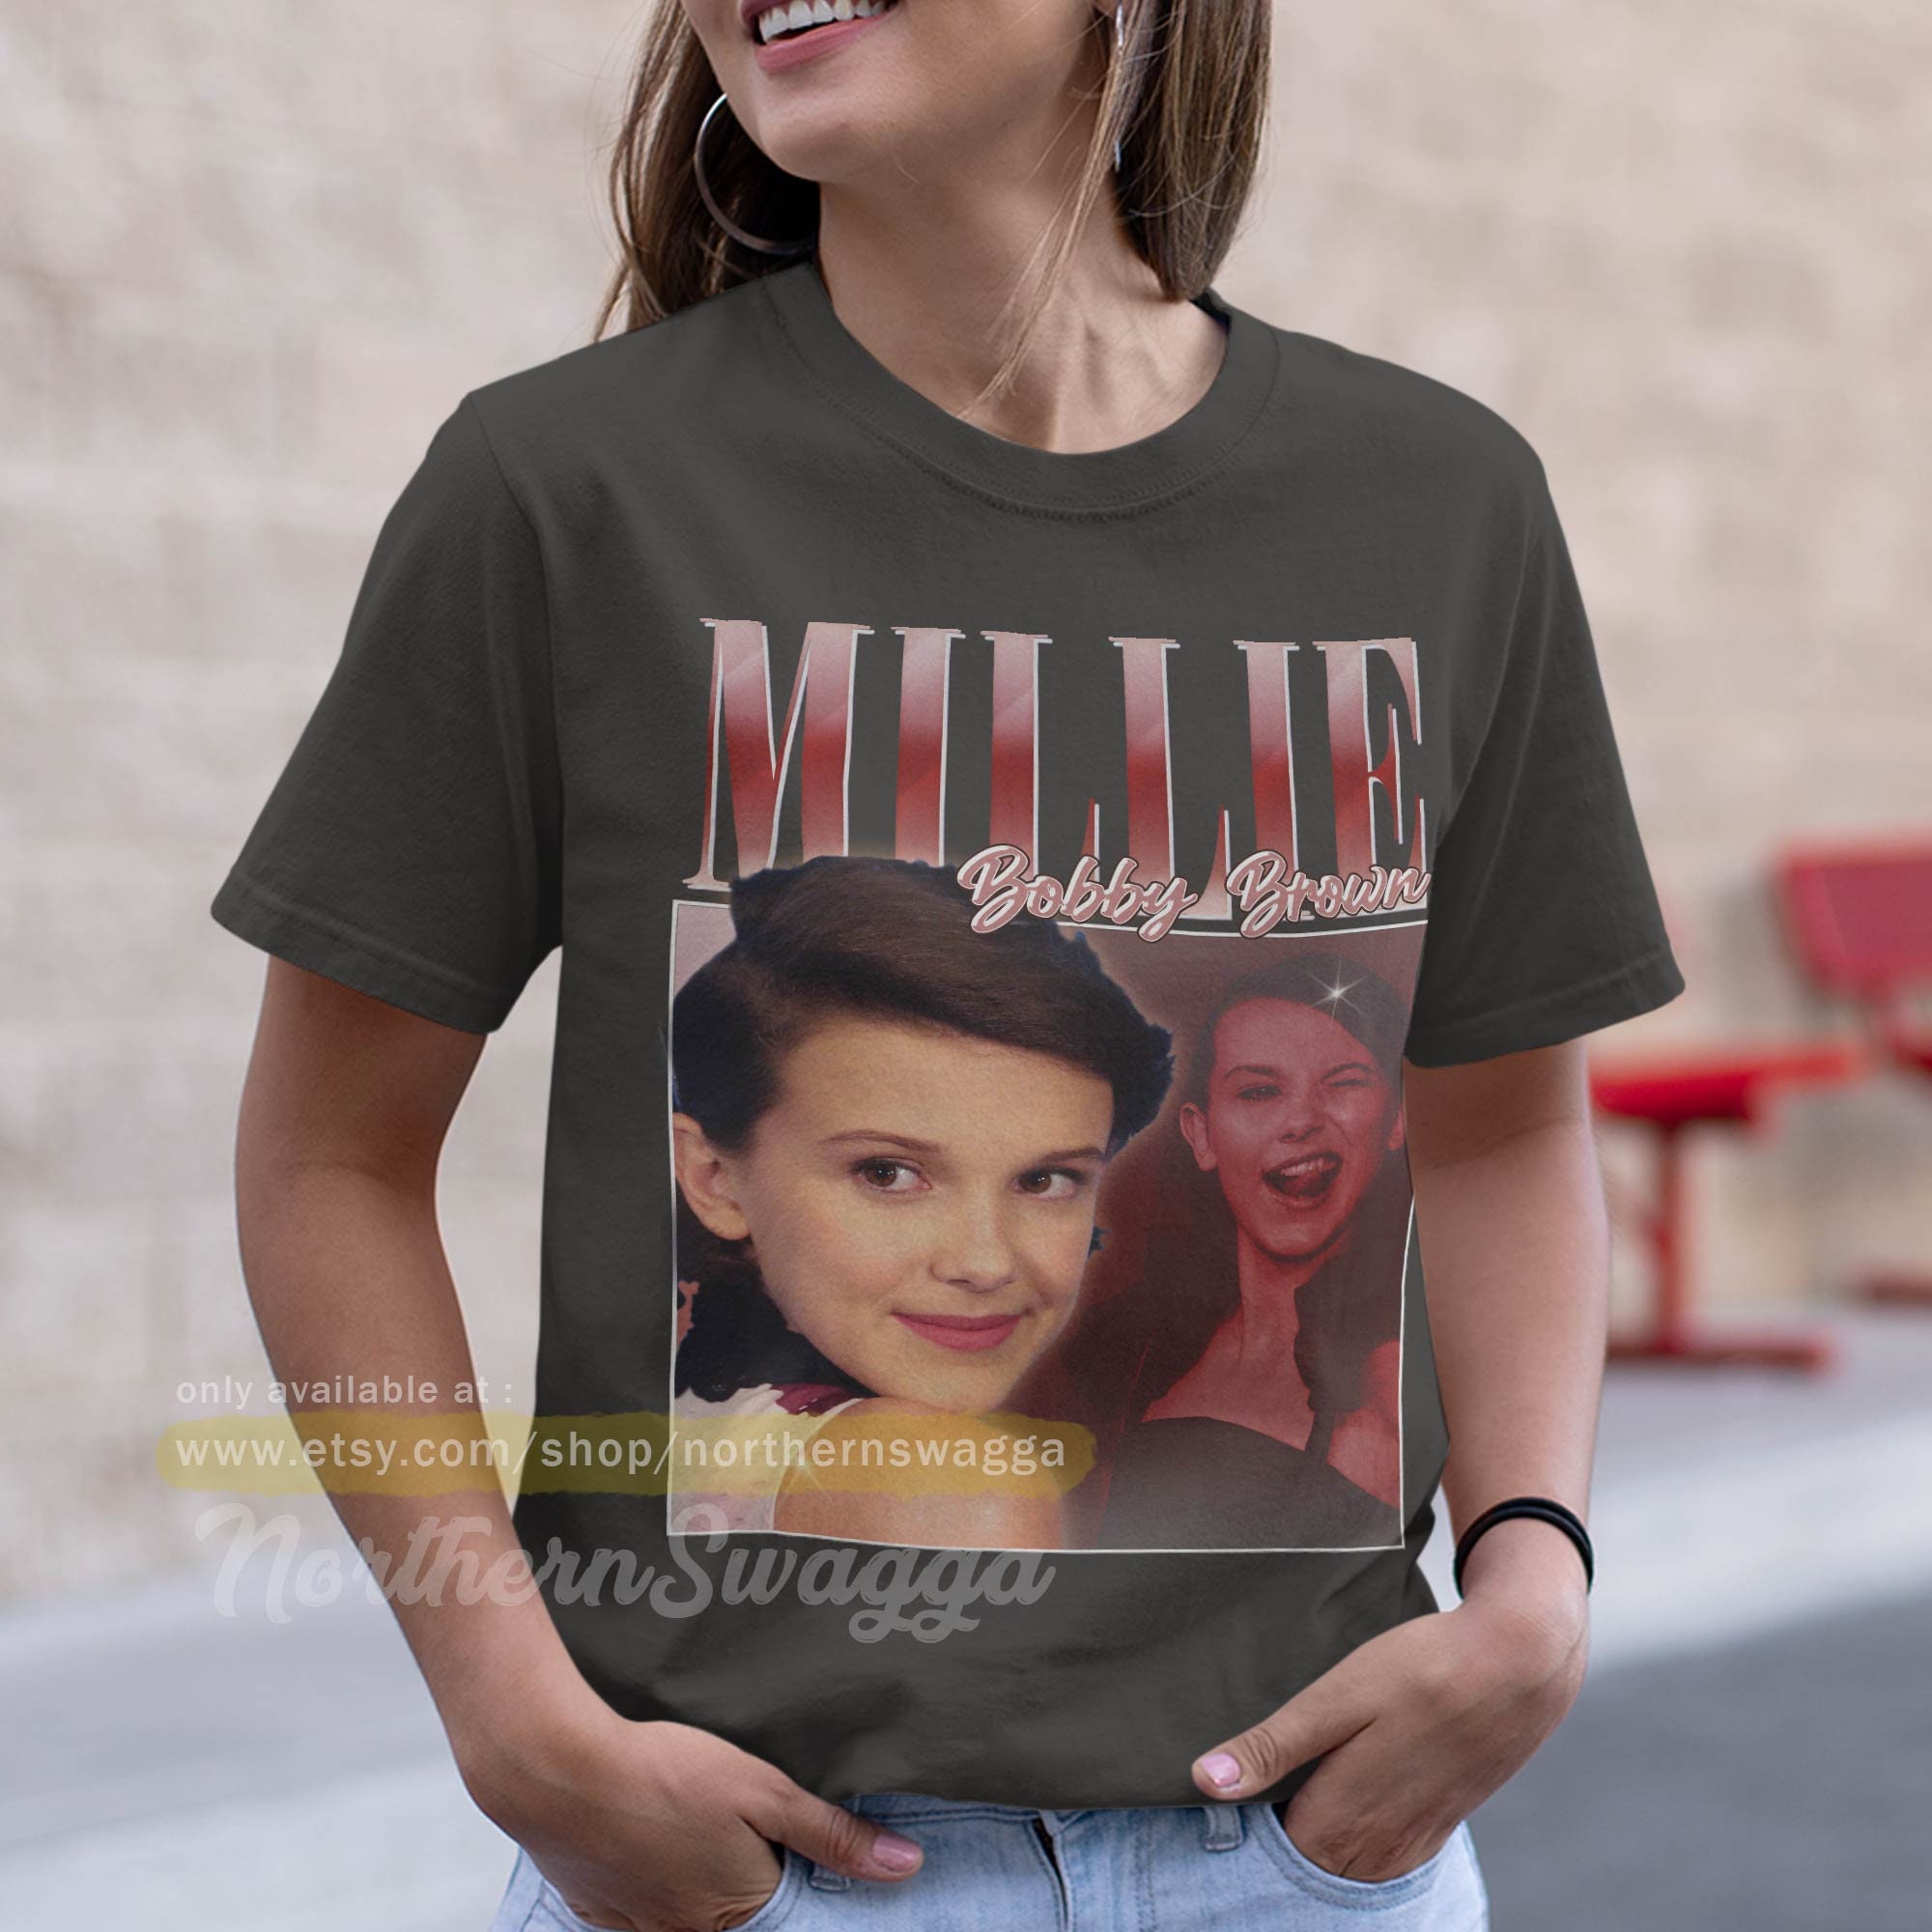 Millie Bobby Brown British actress Beautiful Fan Made Aesthetic Collage -  1 Essential T-Shirt for Sale by GreaterArt